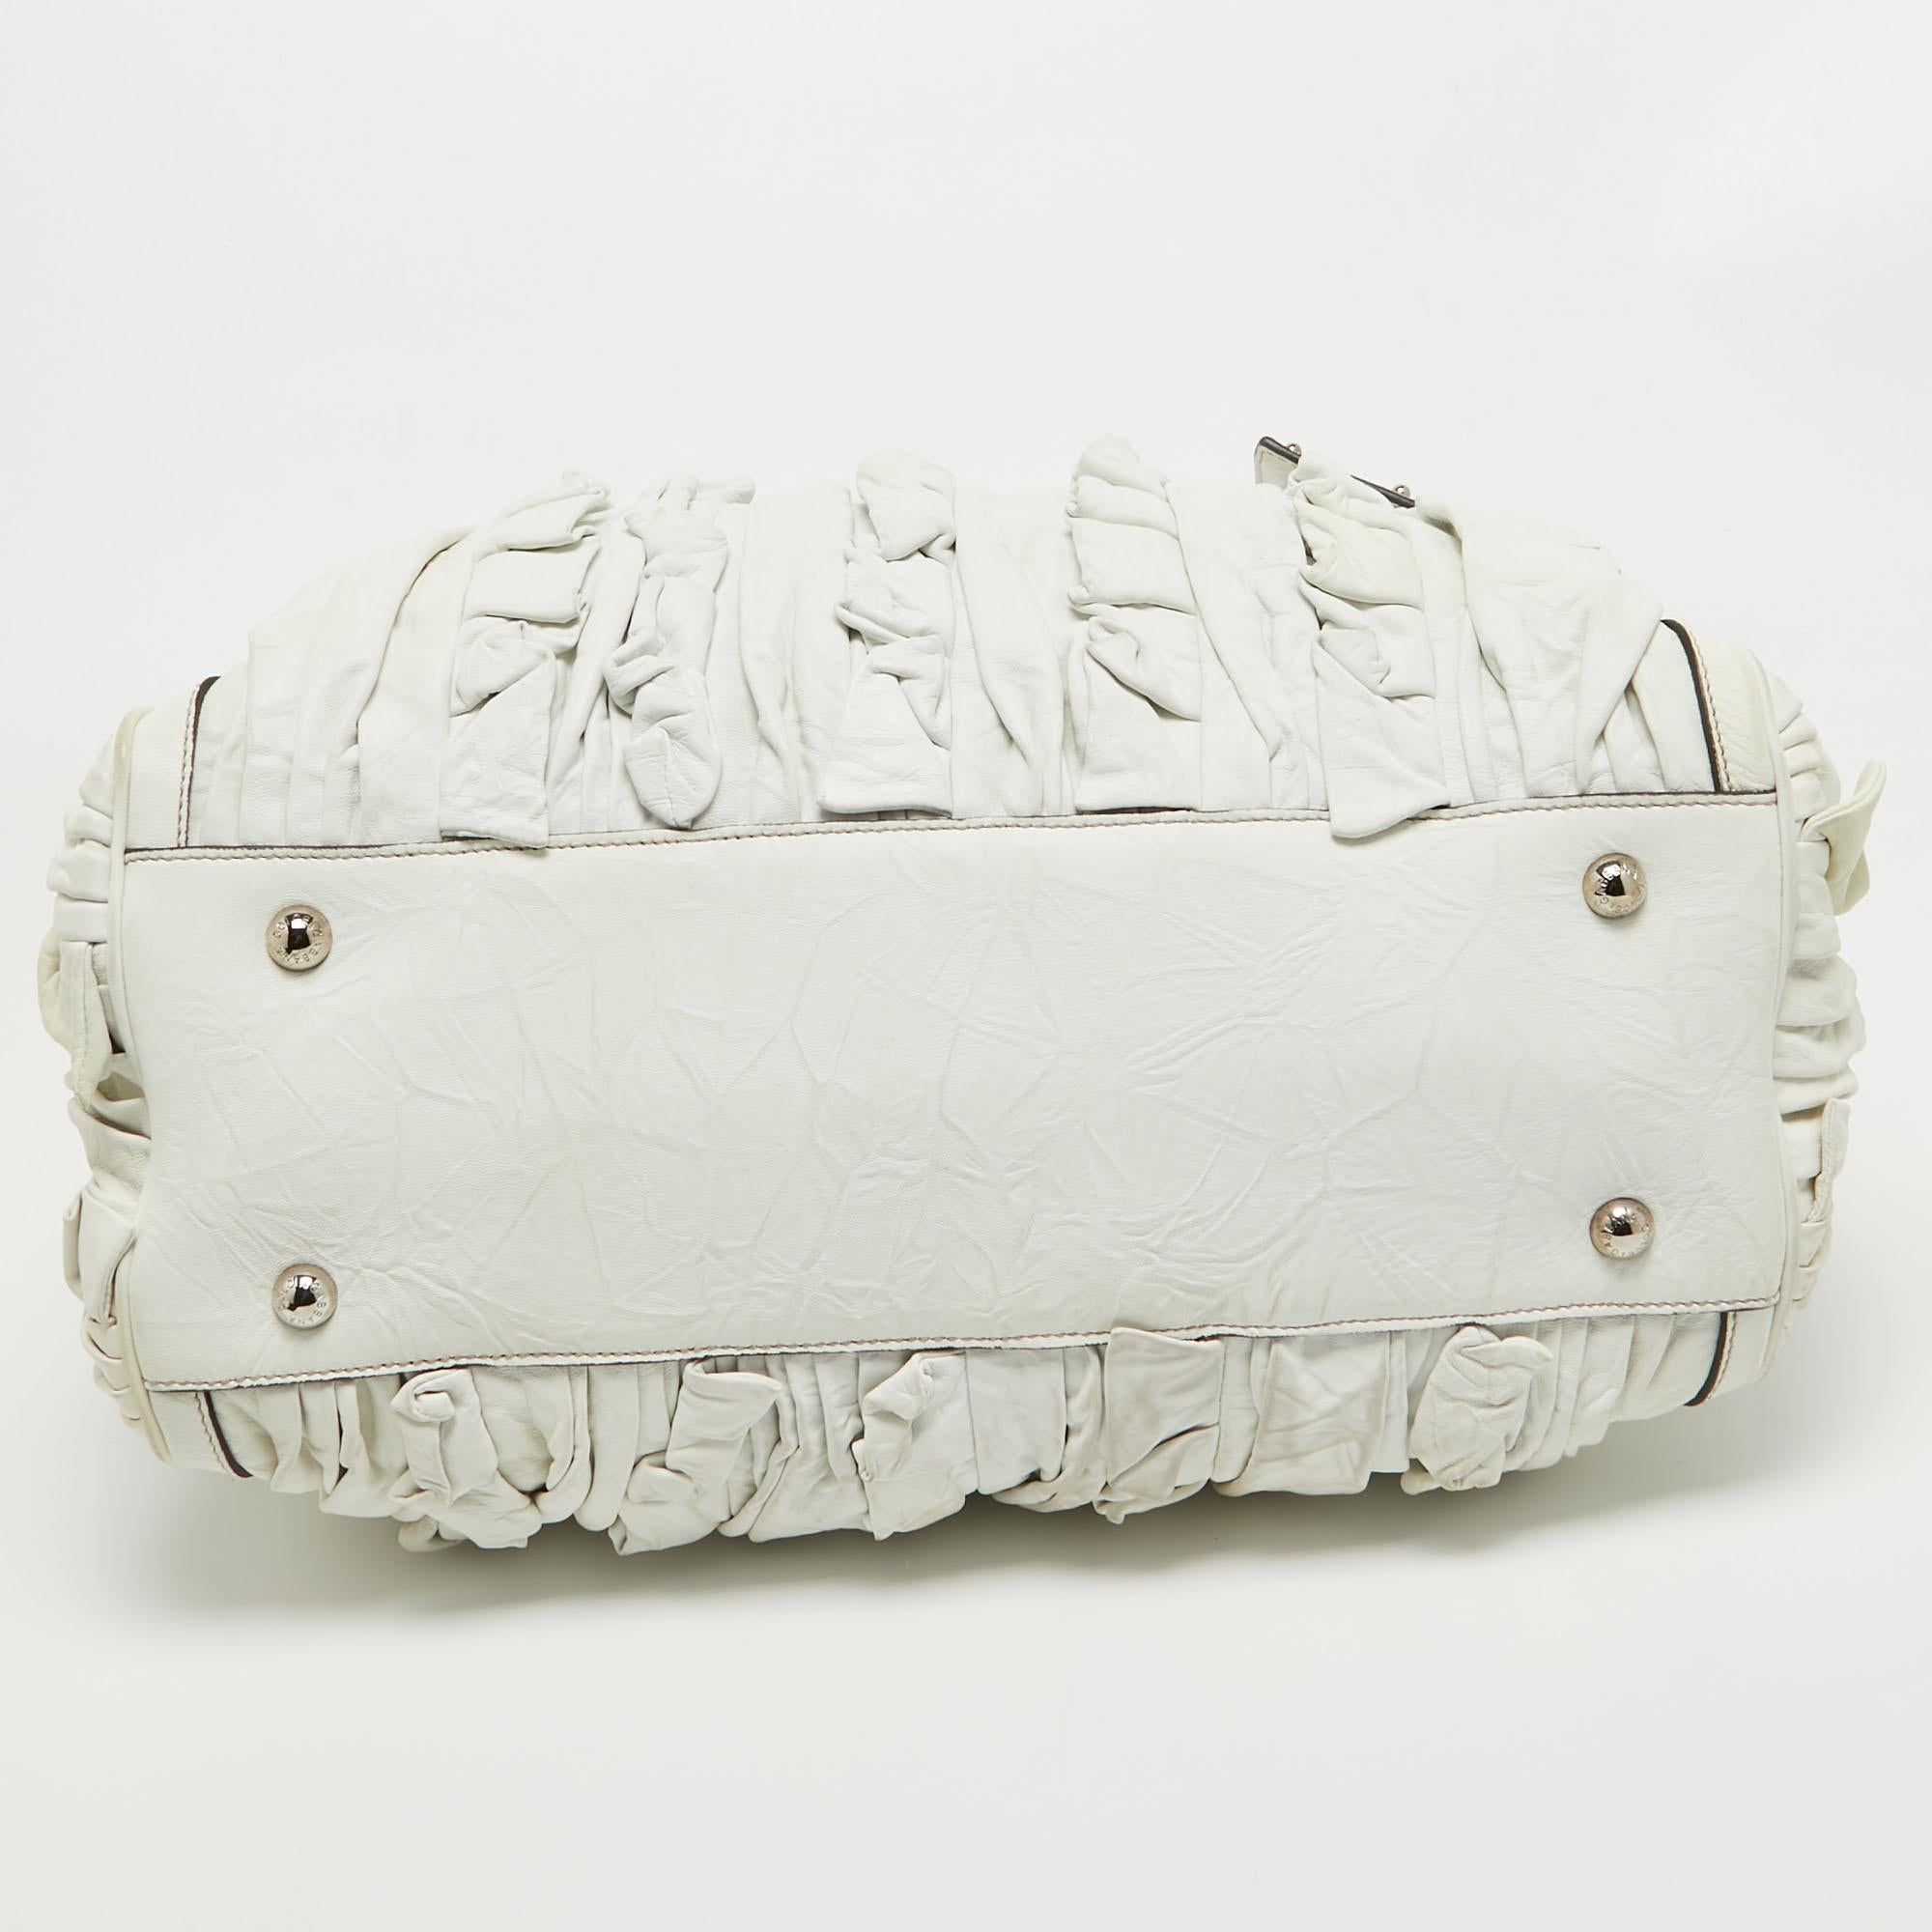 Dolce & Gabbana White Leather Ruffle Miss Brooke Satchel For Sale 4